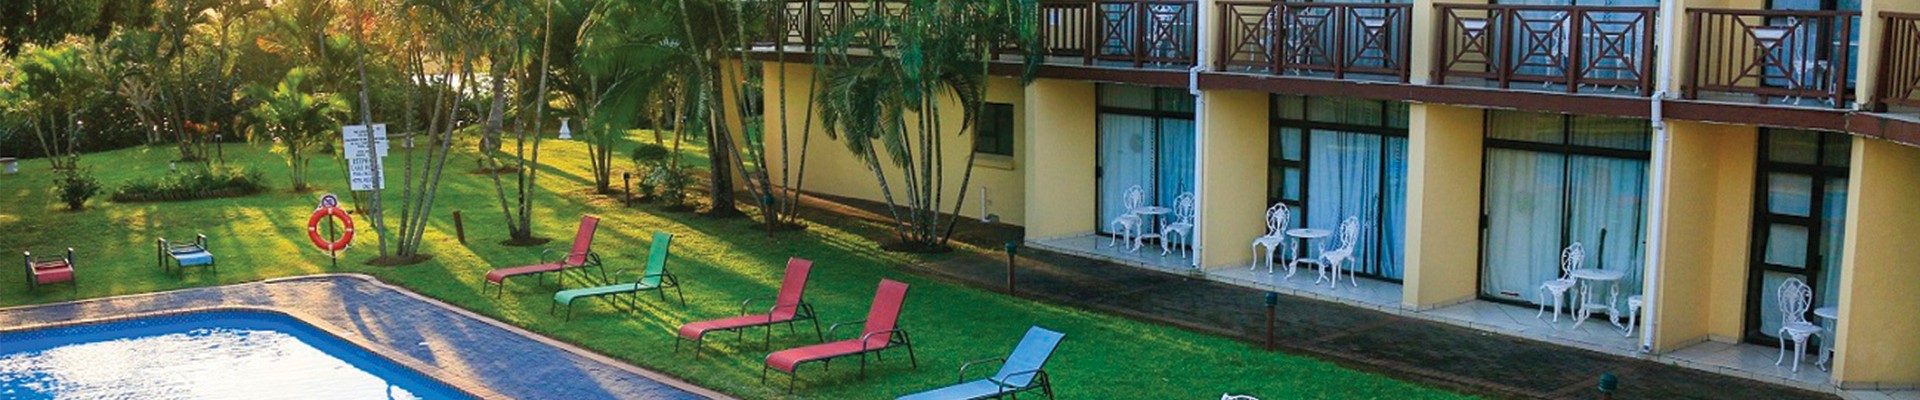 3* Elephant Lake Hotel by BON Hotels - St. Lucia Package (2 Nights)